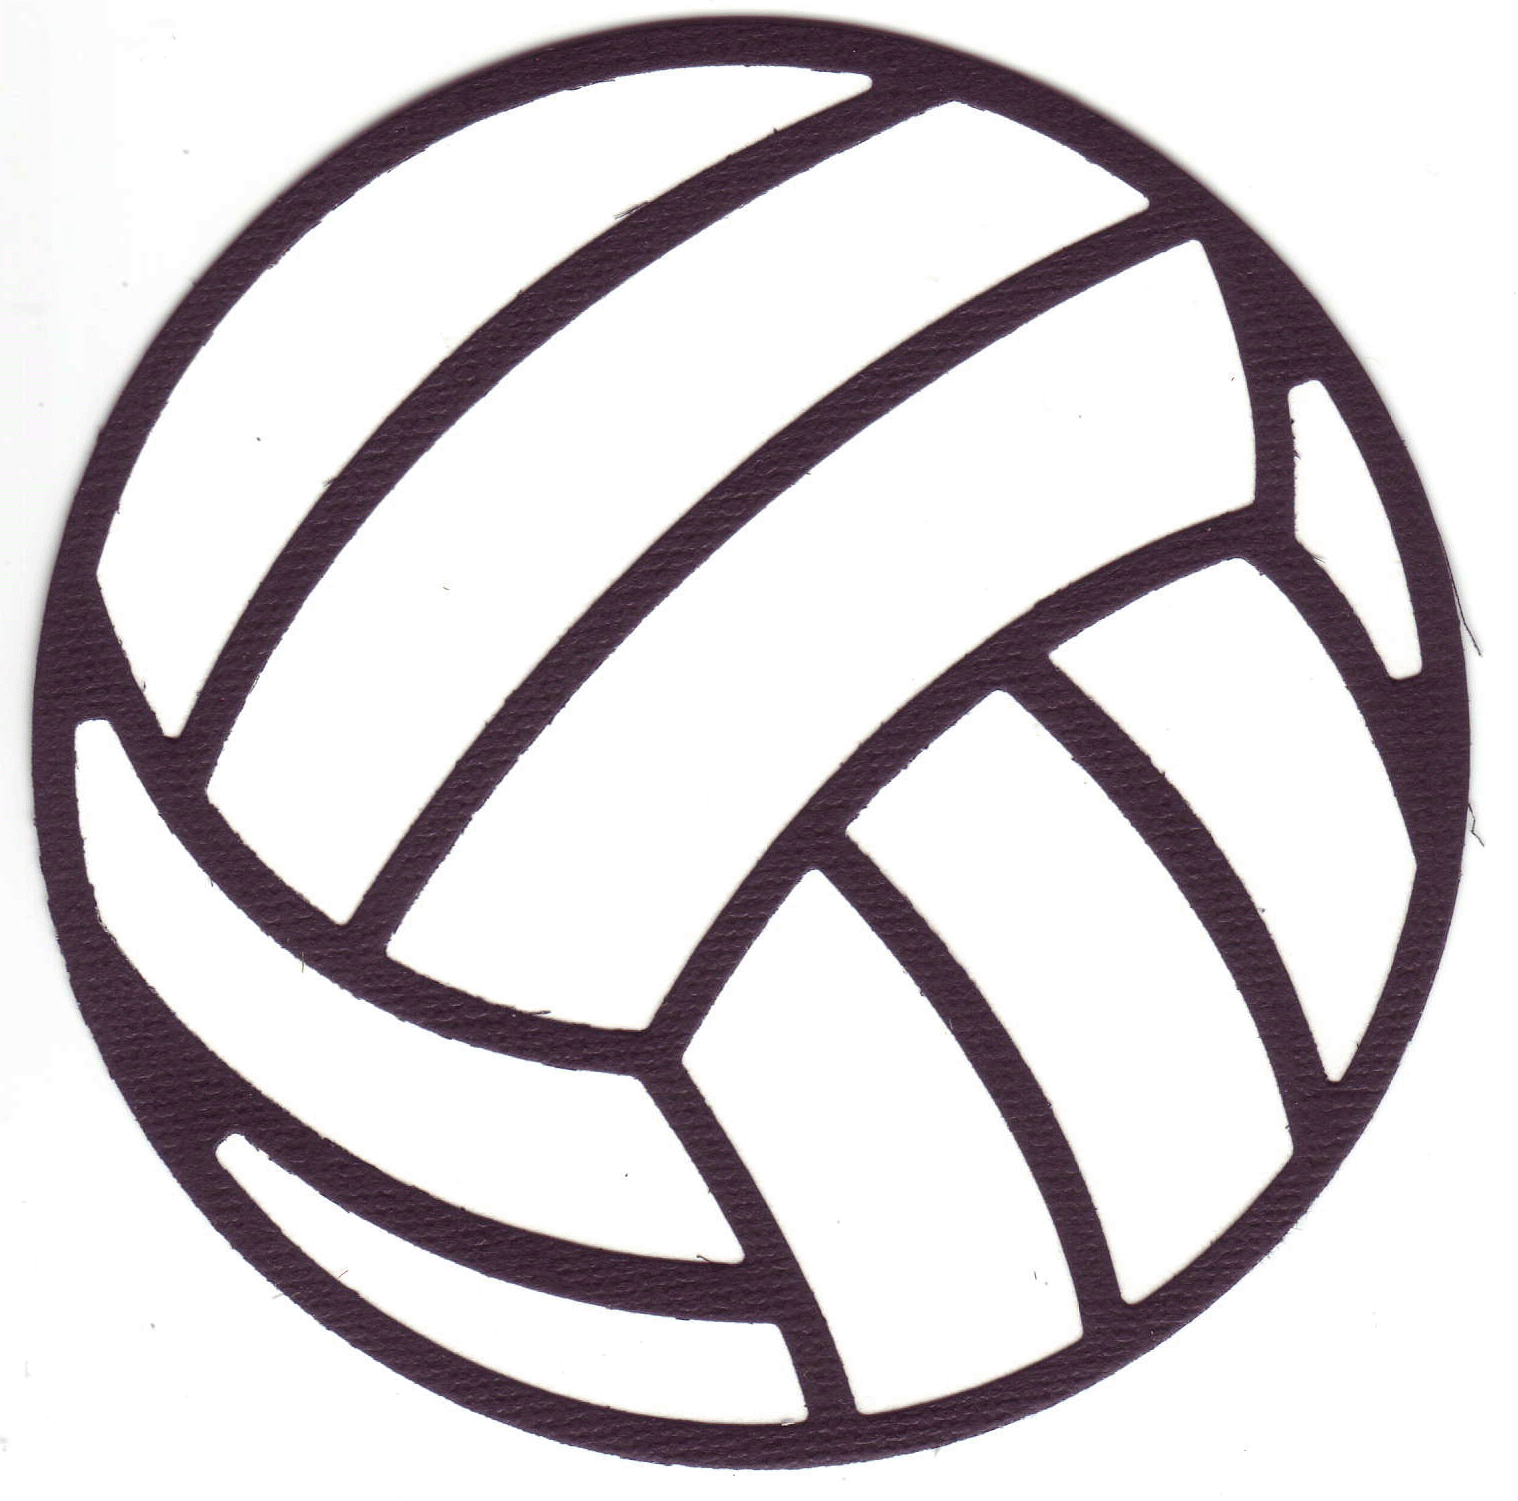 free vector volleyball clipart - photo #12